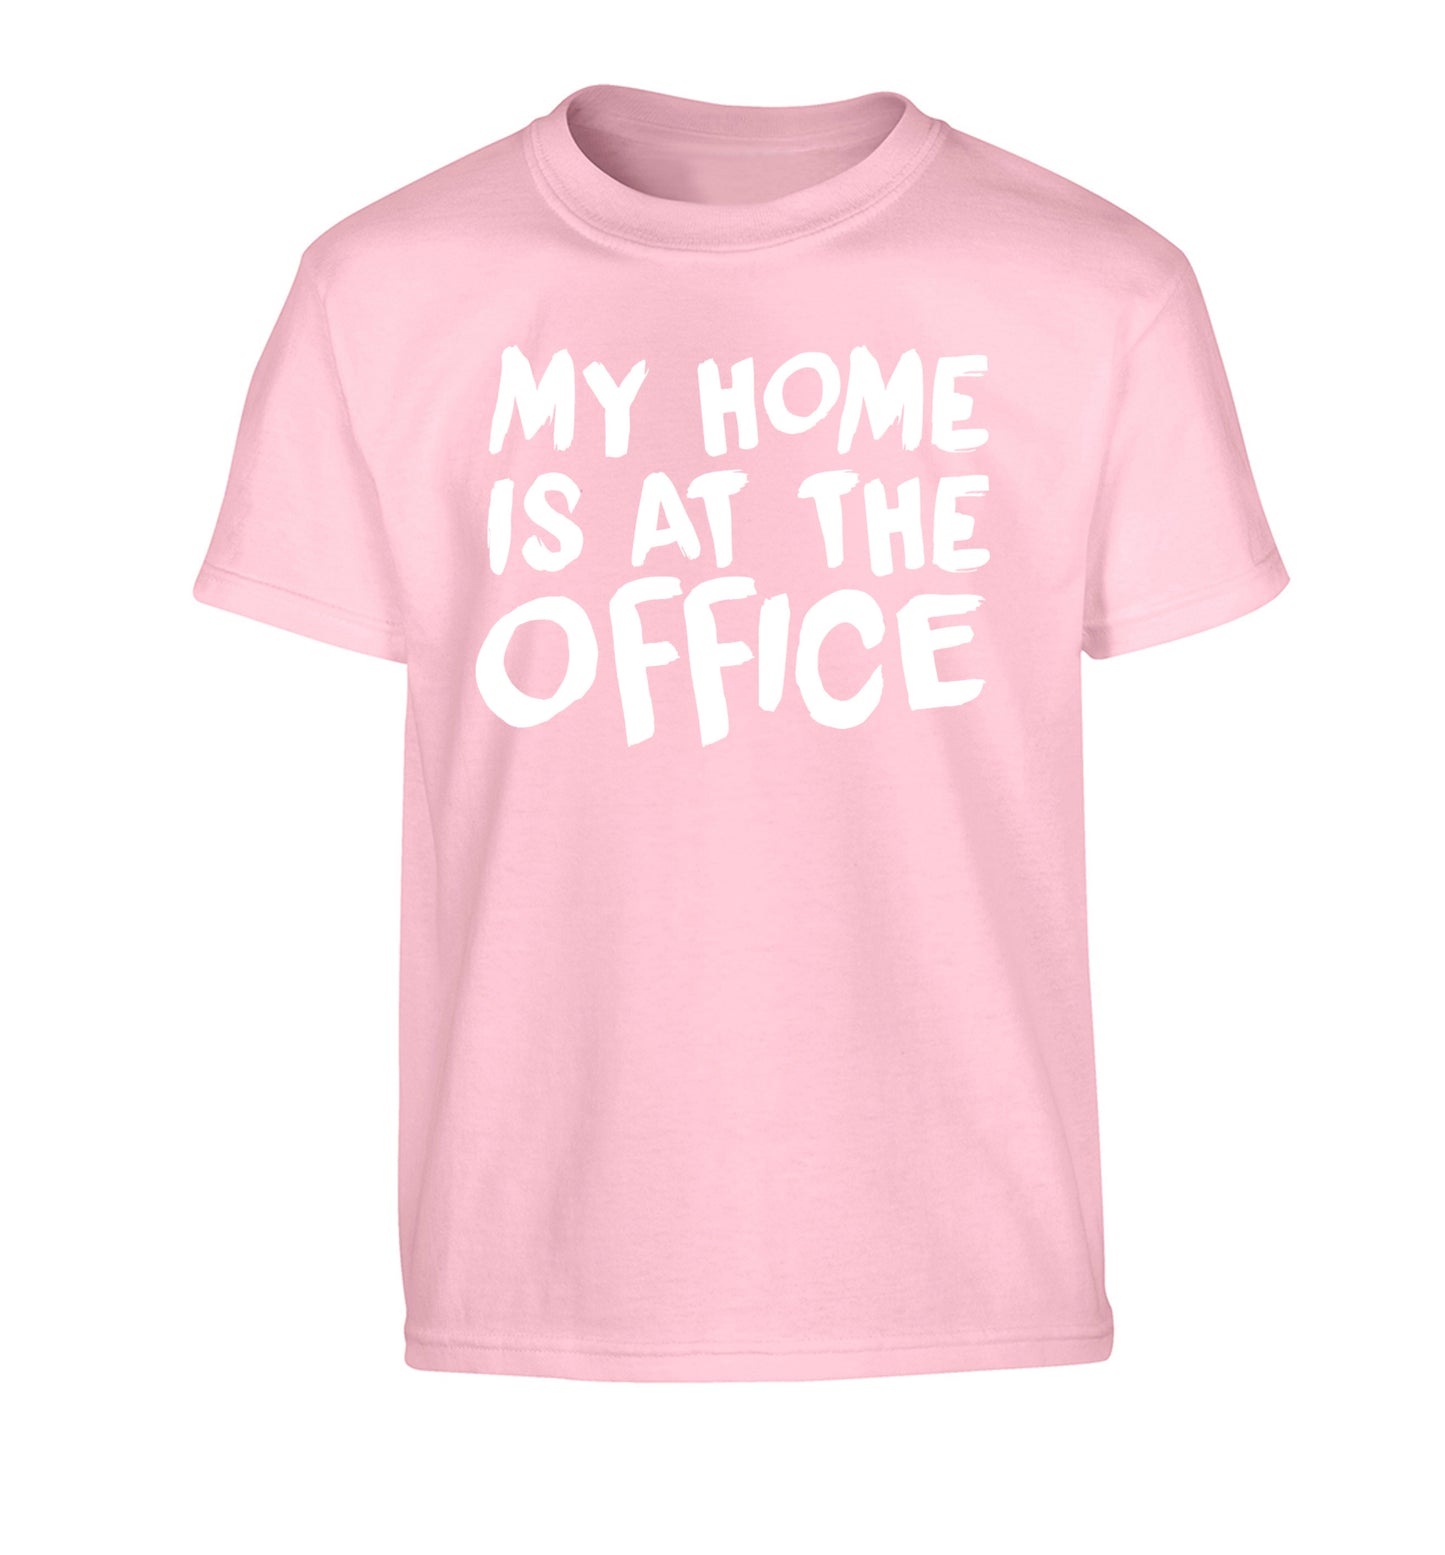 My home is at the office Children's light pink Tshirt 12-14 Years